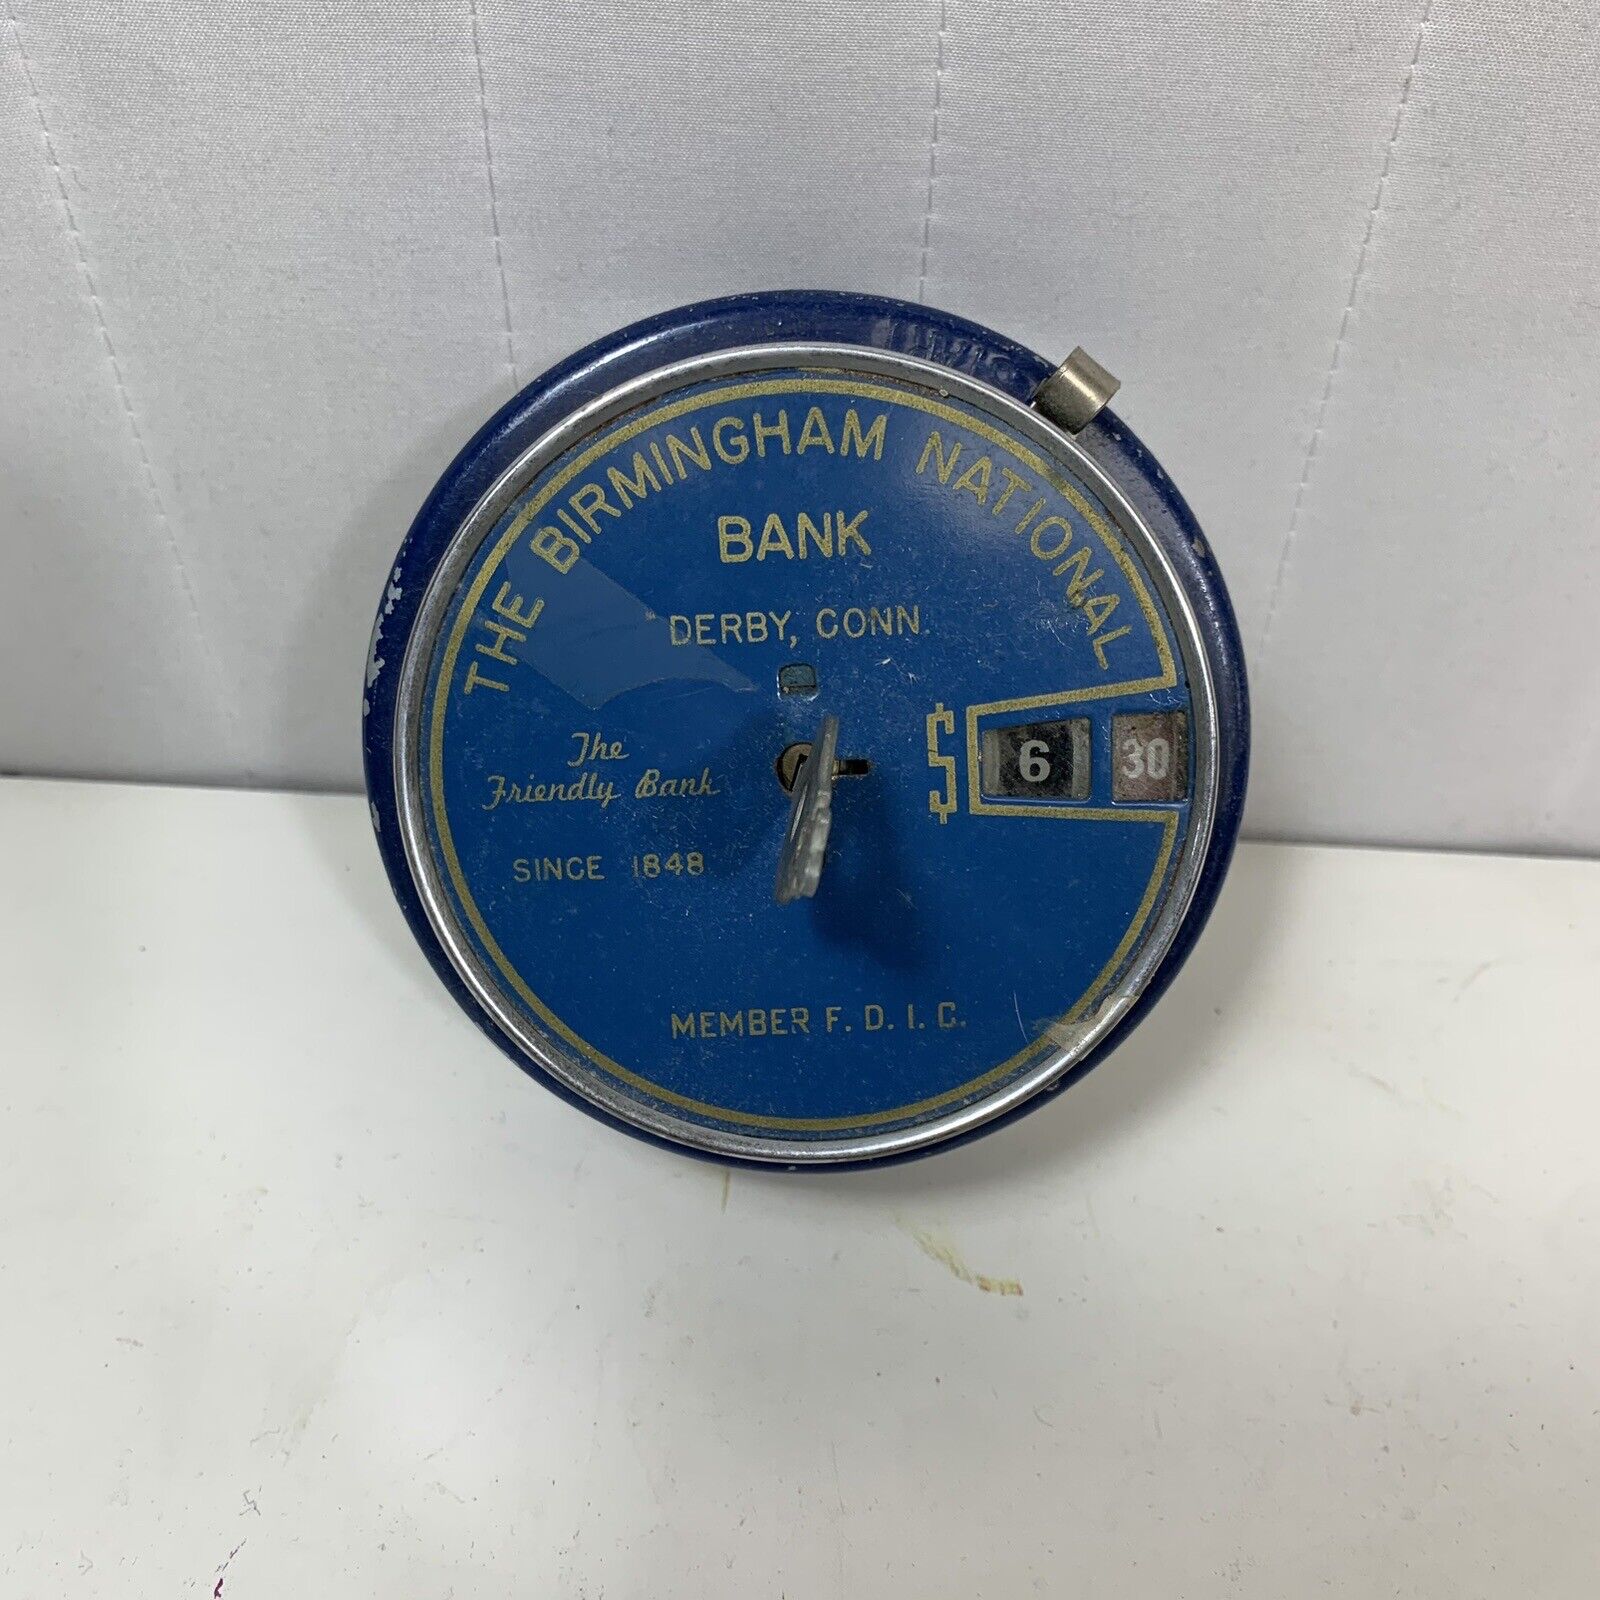 Vintage Add O Bank Coin Counter The Birmingham National Bank W/Key Works Blue